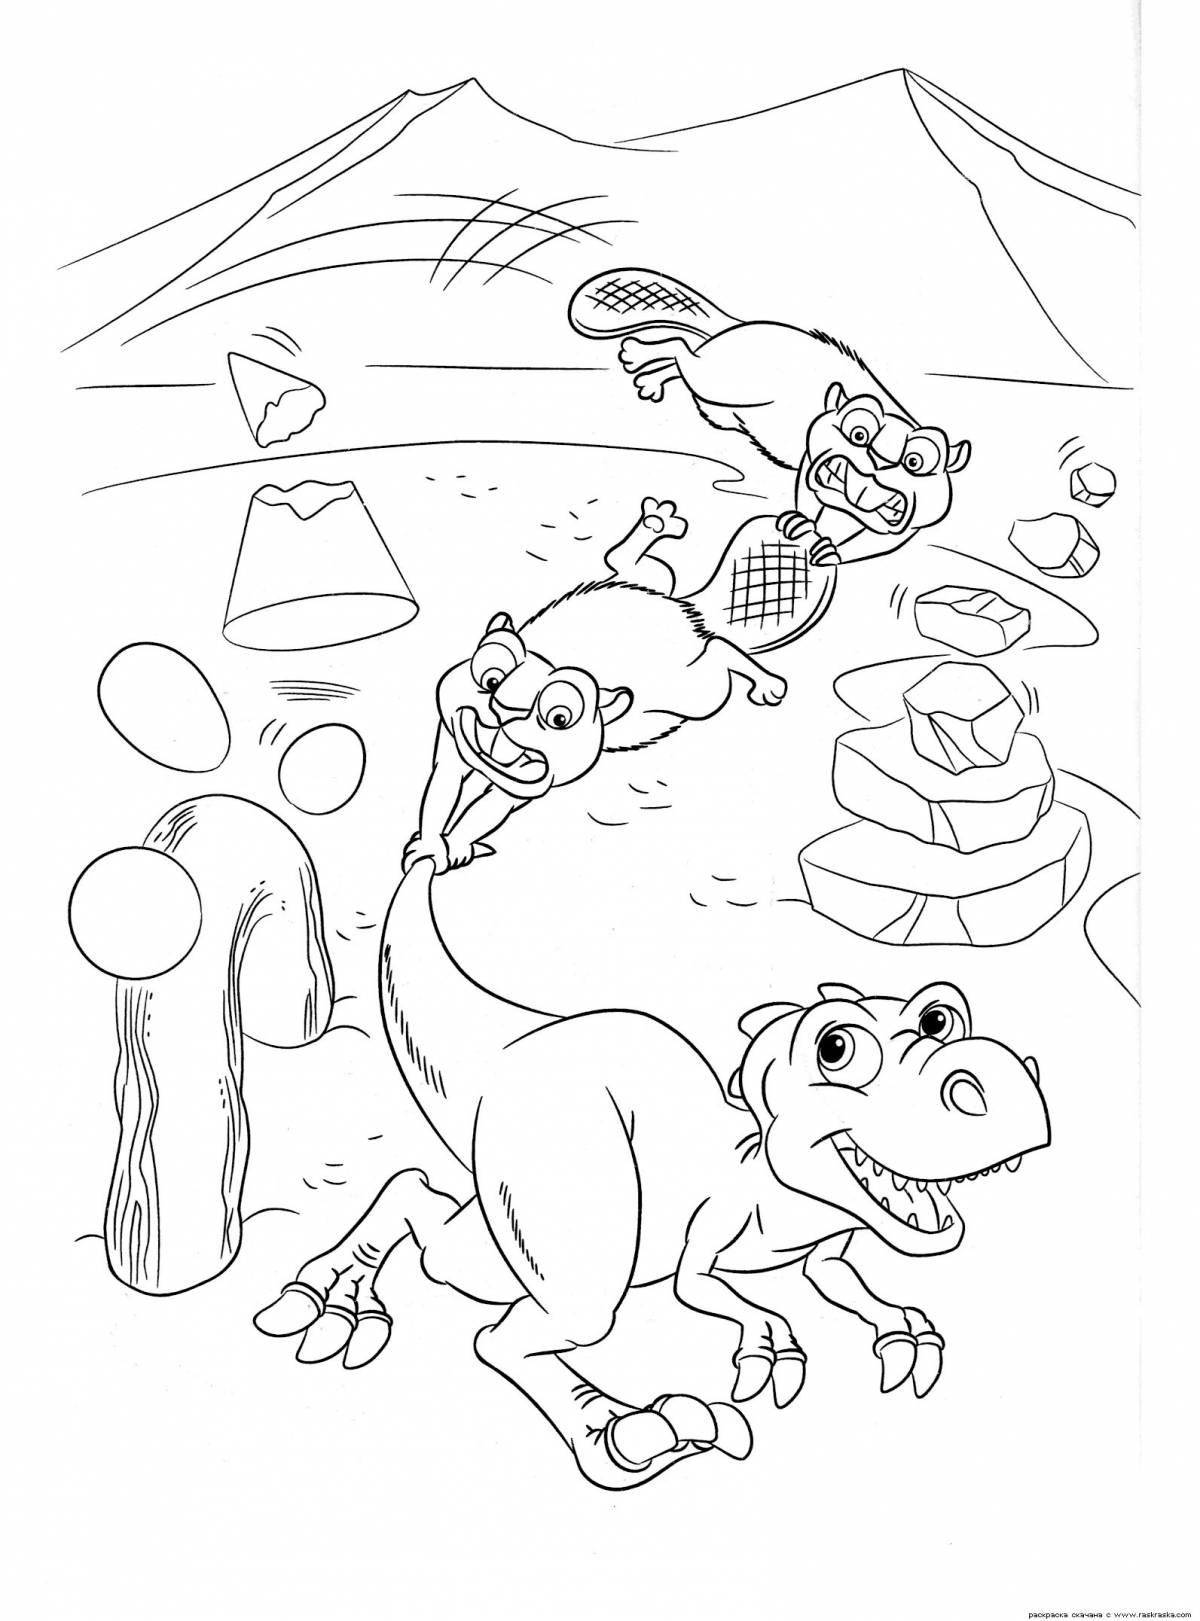 Fantastic coloring book ice age dinosaurs